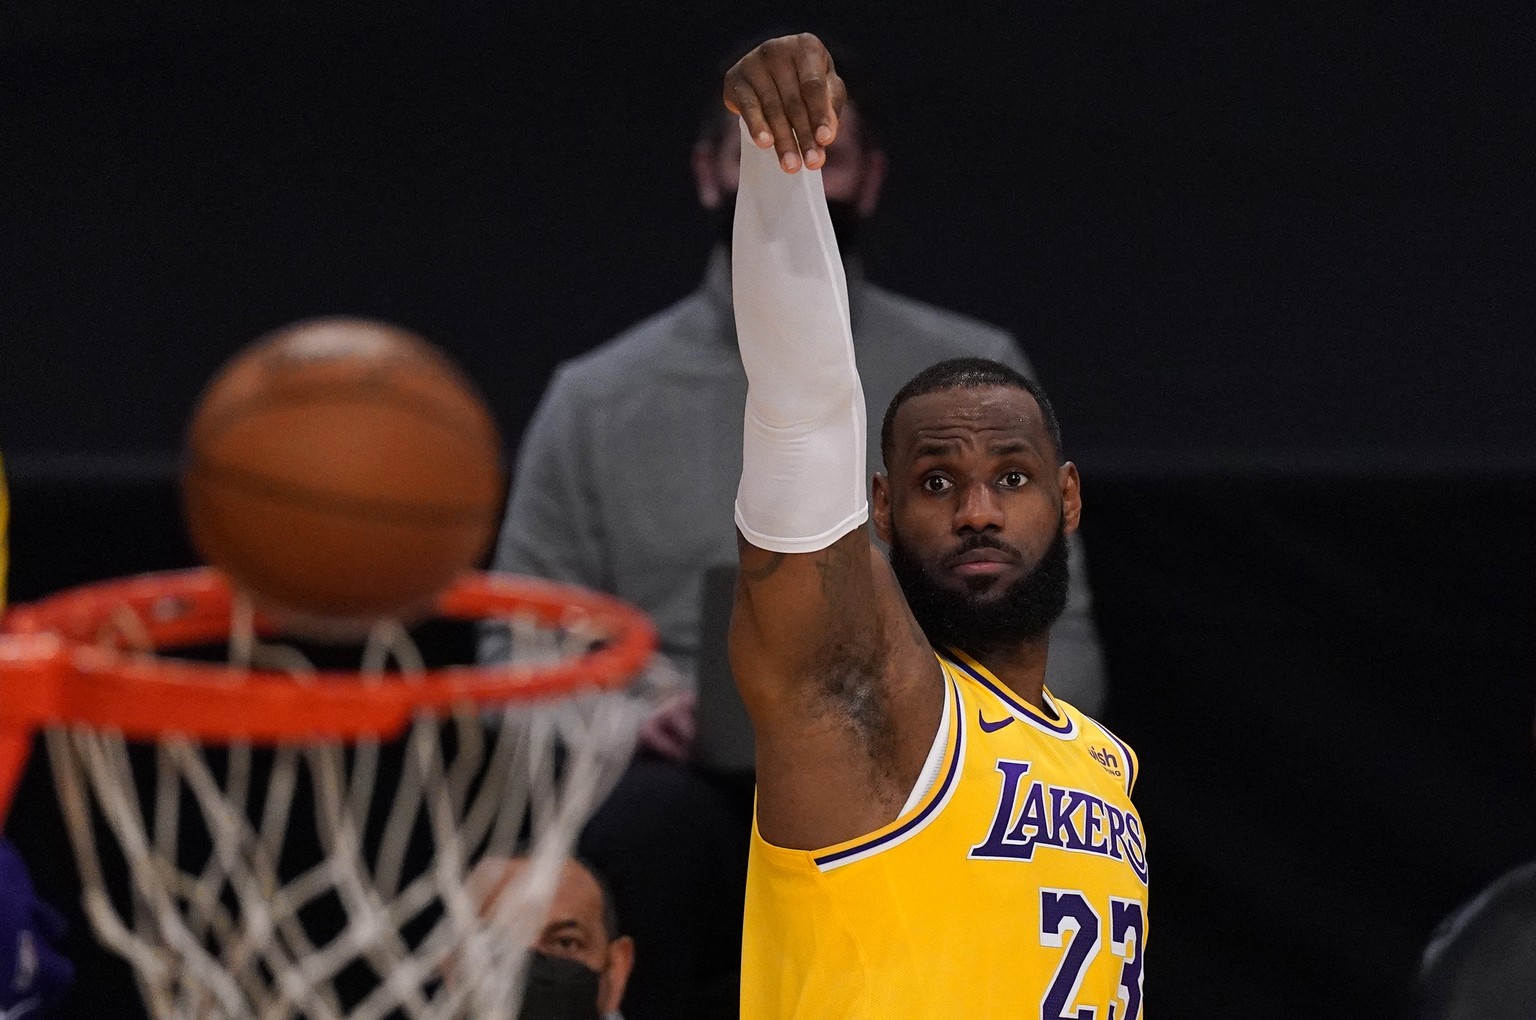 Los Angeles Lakers forward LeBron James shoots during the first half of an NBA basketball game against the Oklahoma City Thunder Monday, Feb. 8, 2021, in Los Angeles. (AP Photo/Mark J. Terrill)
LeBron ...